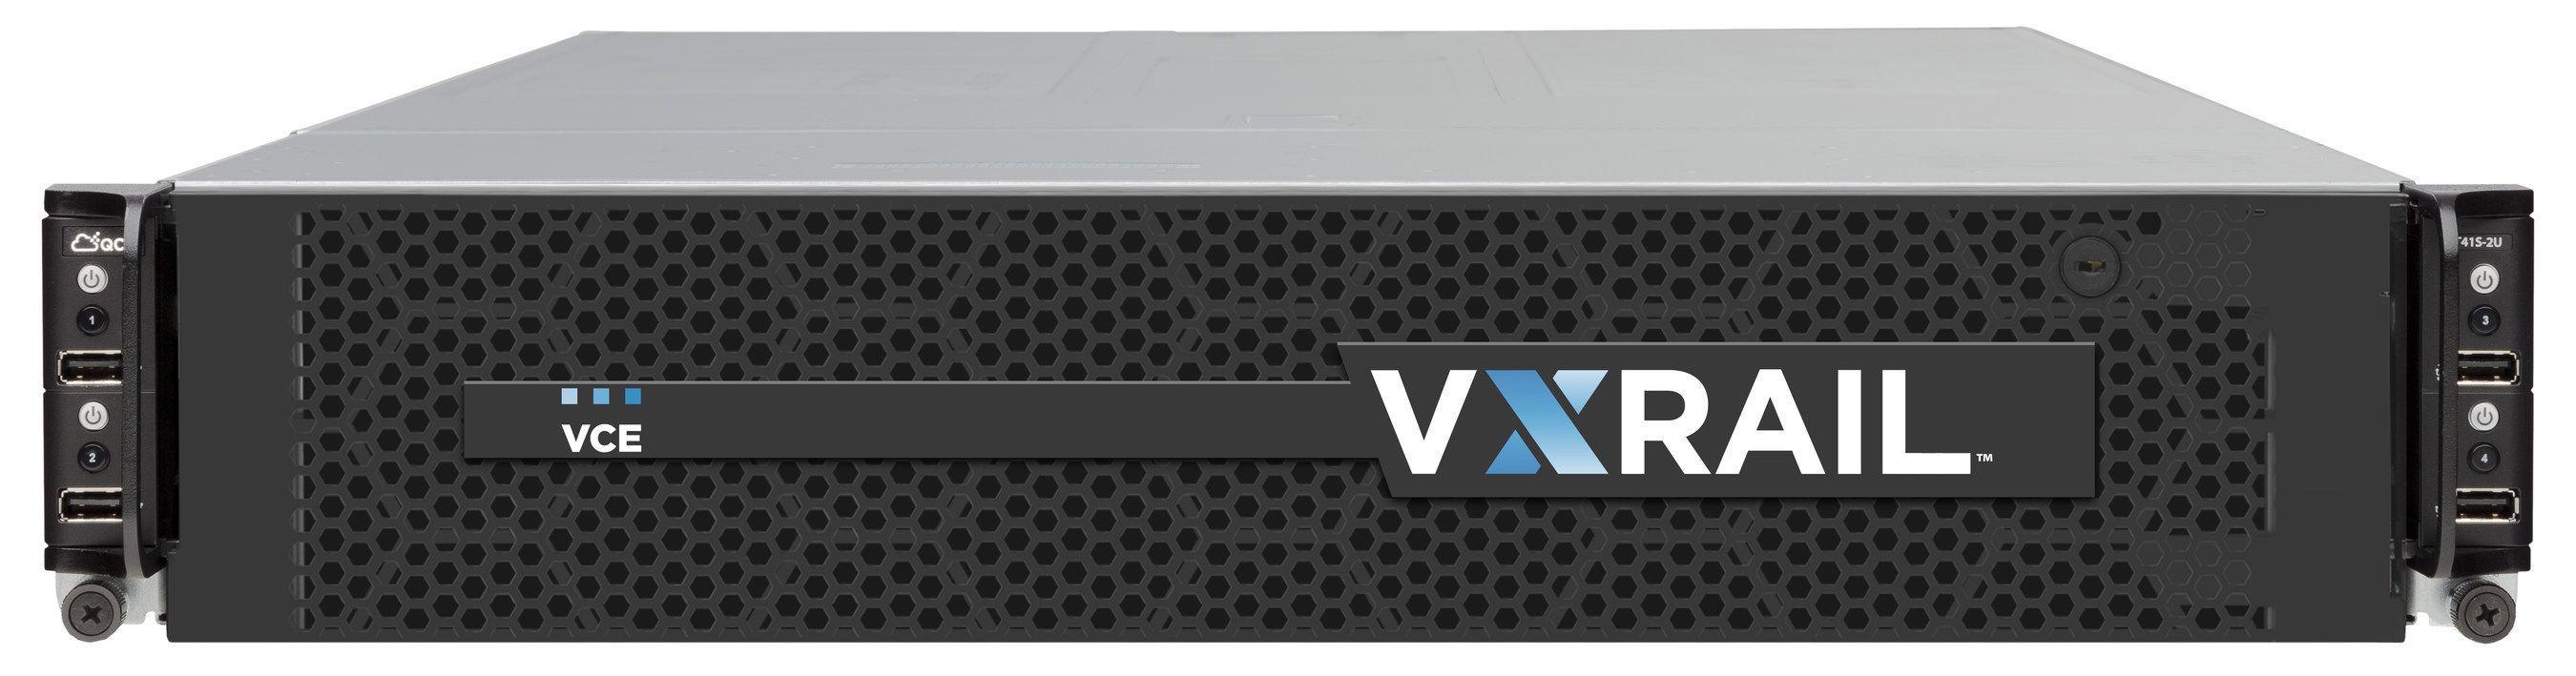 VCE Logo - EMC and VMware Introduce Hyper-Converged VCE VxRail Appliance Family